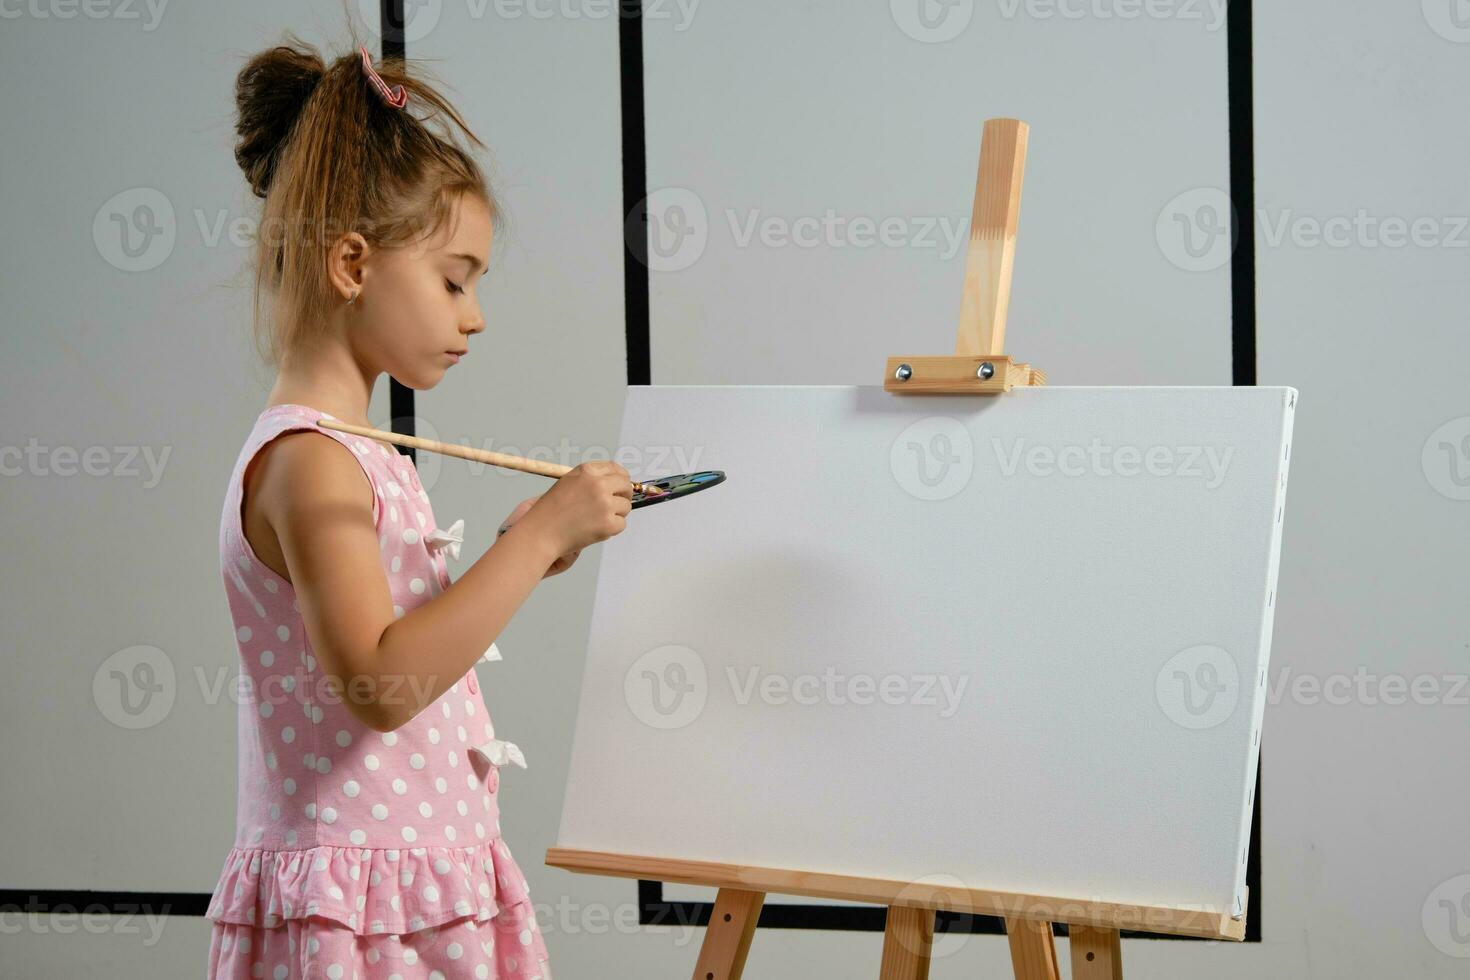 Little girl artist in a pink dress is standing behind easel and painting with brush on canvas at art studio with white walls. Medium close-up shot. photo